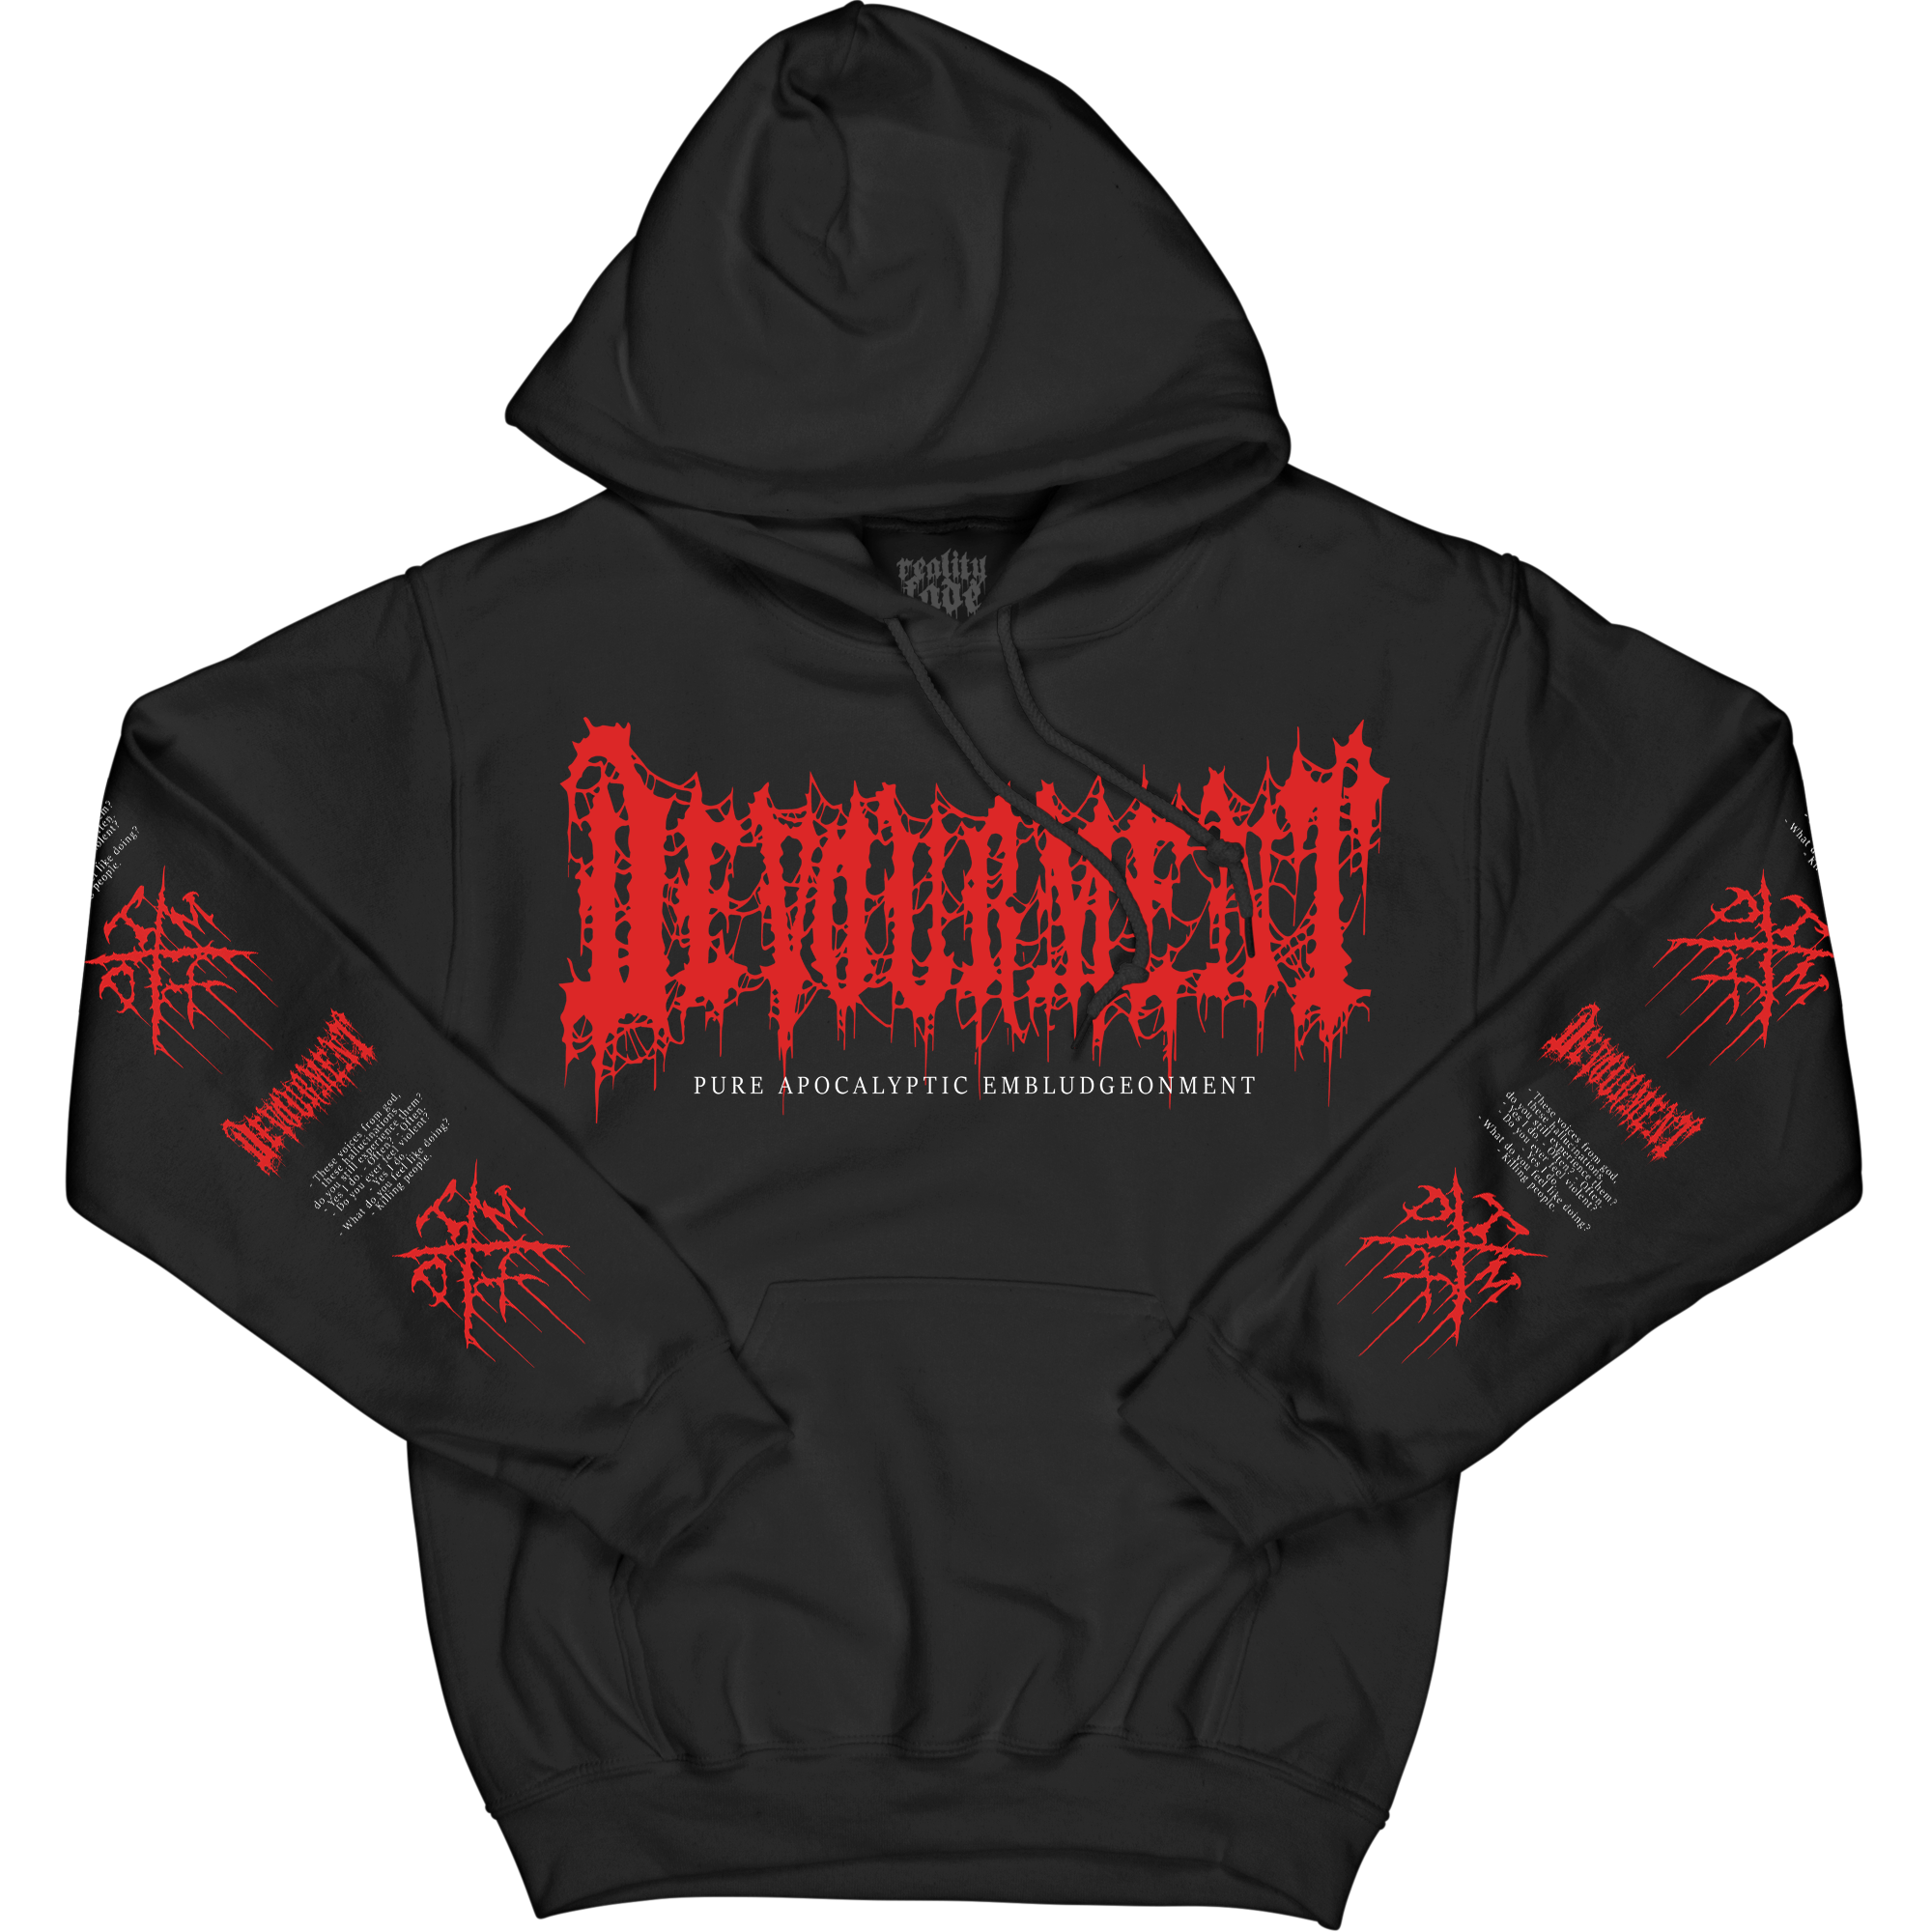 Devourment 'Pure Apocalyptic Embludgeonment' Hoodie | PRE-ORDER ...